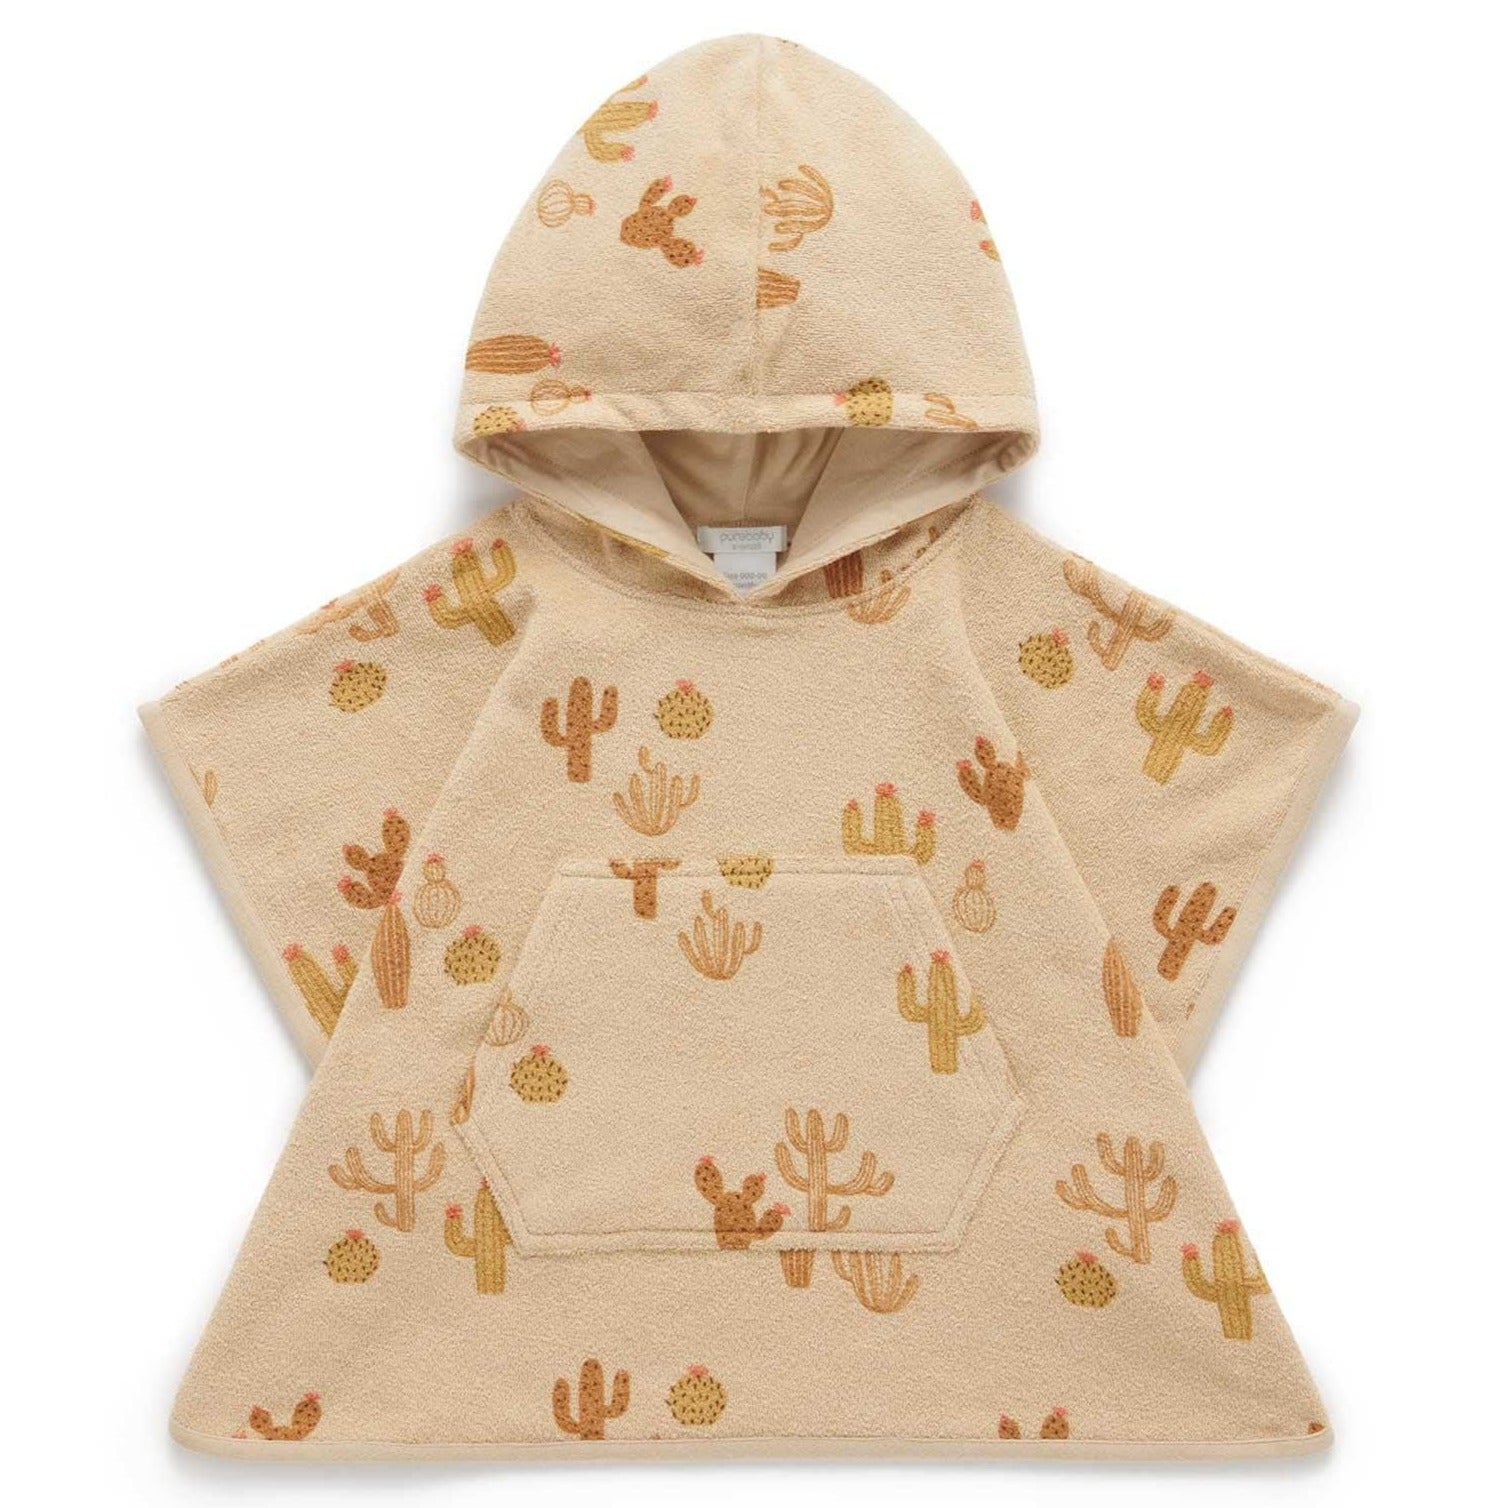 purebaby hooded towel - angus and dudley